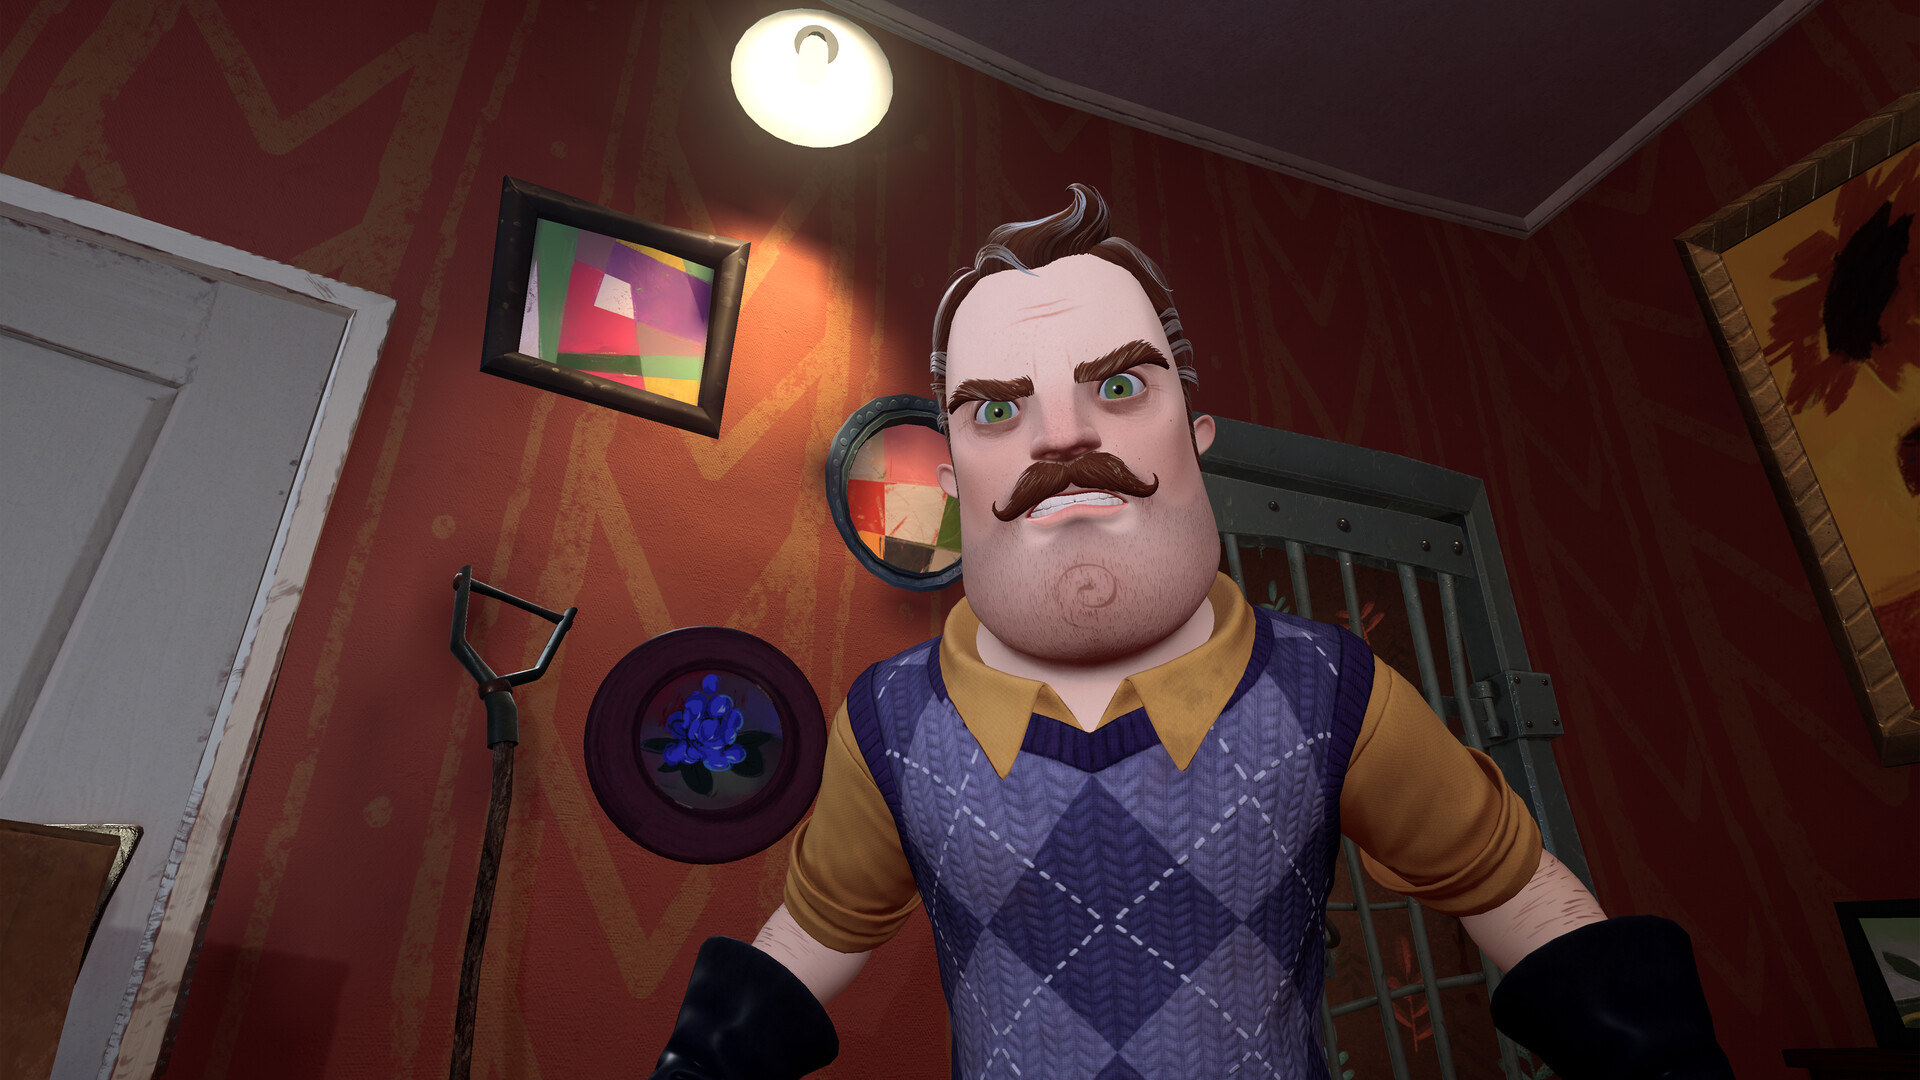 [$ 7.23] Hello Neighbor VR: Search and Rescue Steam CD Key